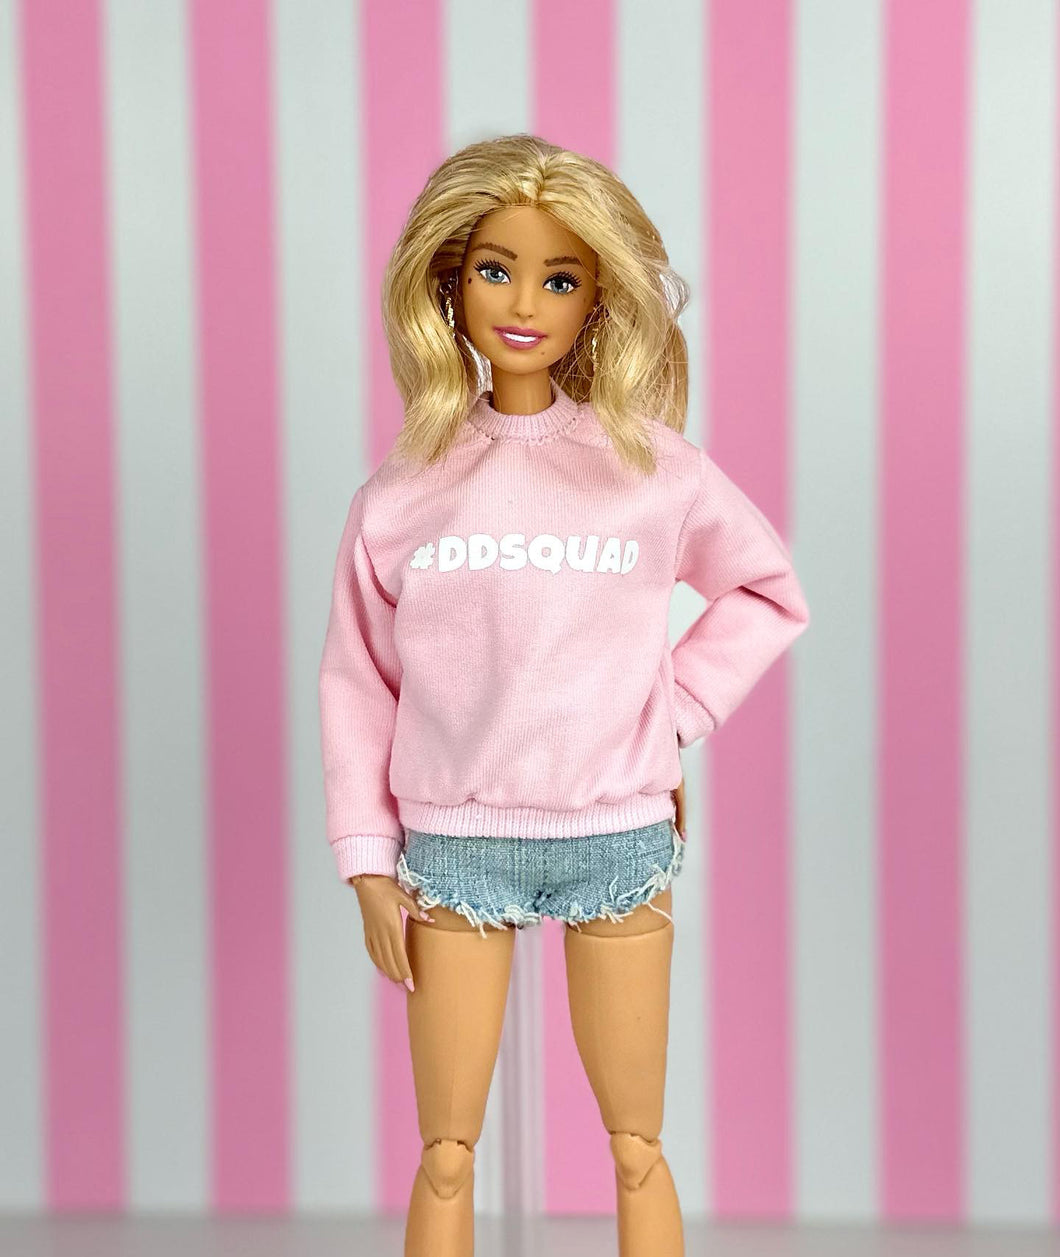 Delightful Dolls Sweatshirt and #ddsquad Sweater for Barbie doll